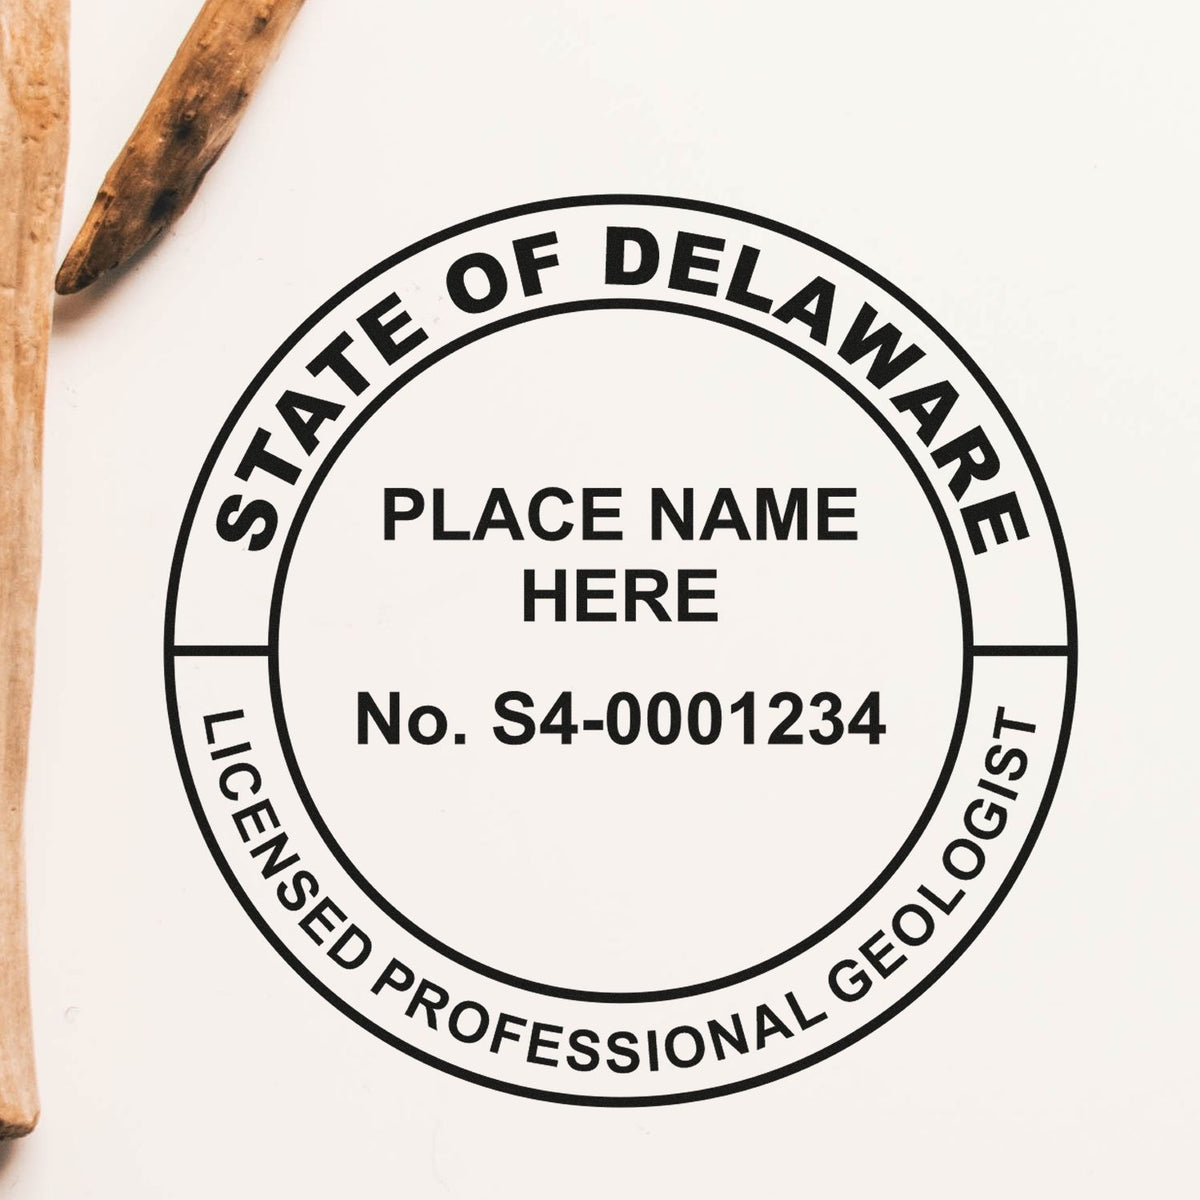 A photograph of the Digital Delaware Geologist Stamp, Electronic Seal for Delaware Geologist stamp impression reveals a vivid, professional image of the on paper.